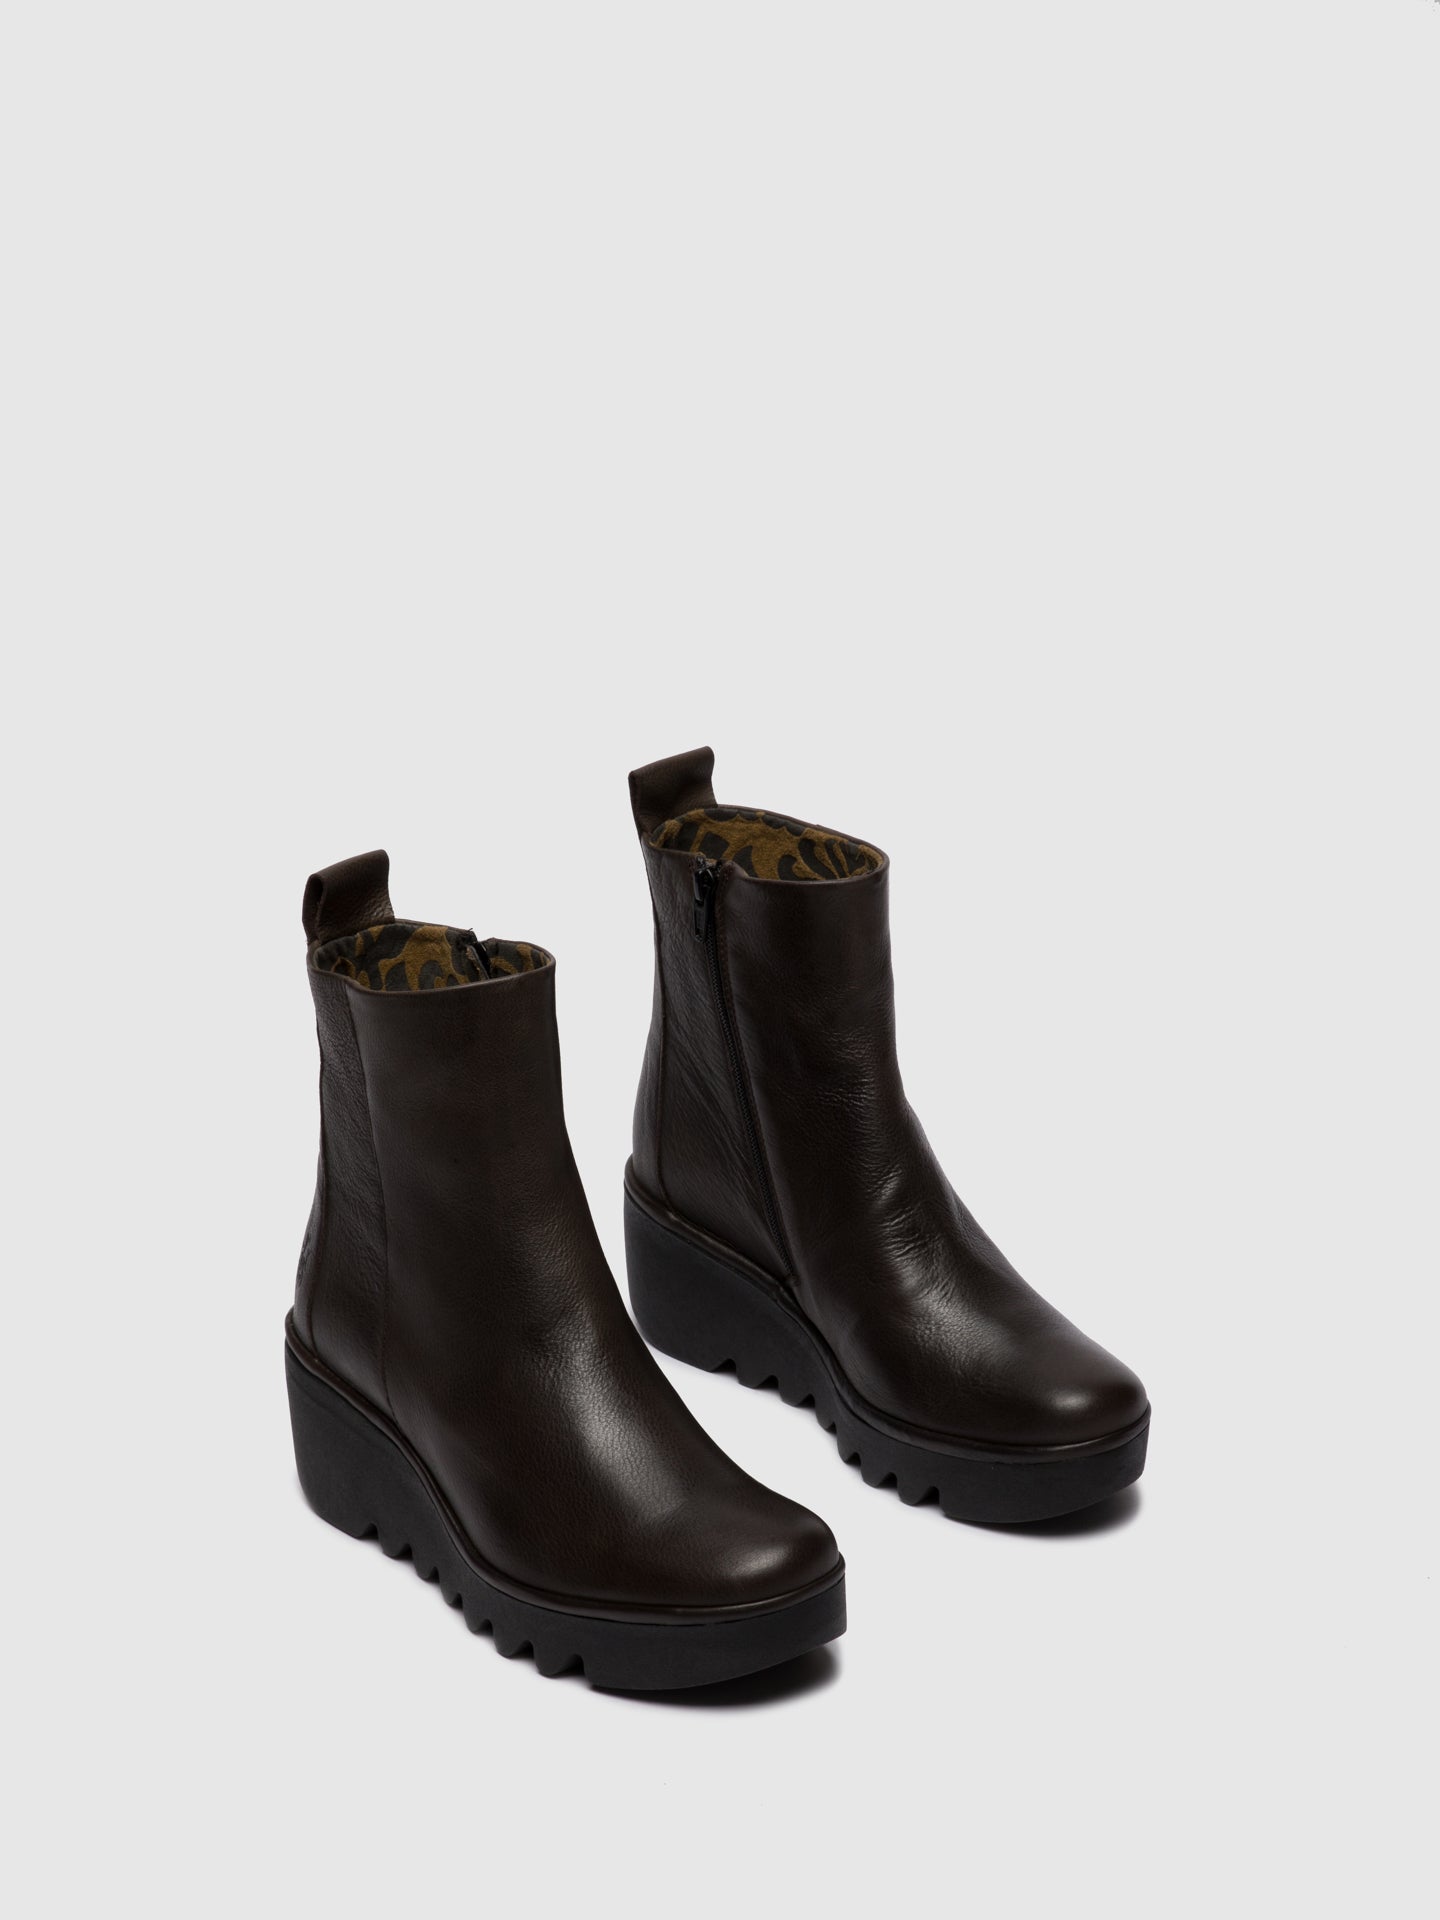 Fly London - Zip Up Ankle Boots BALE250FLY VERONA GROUND - Overcube